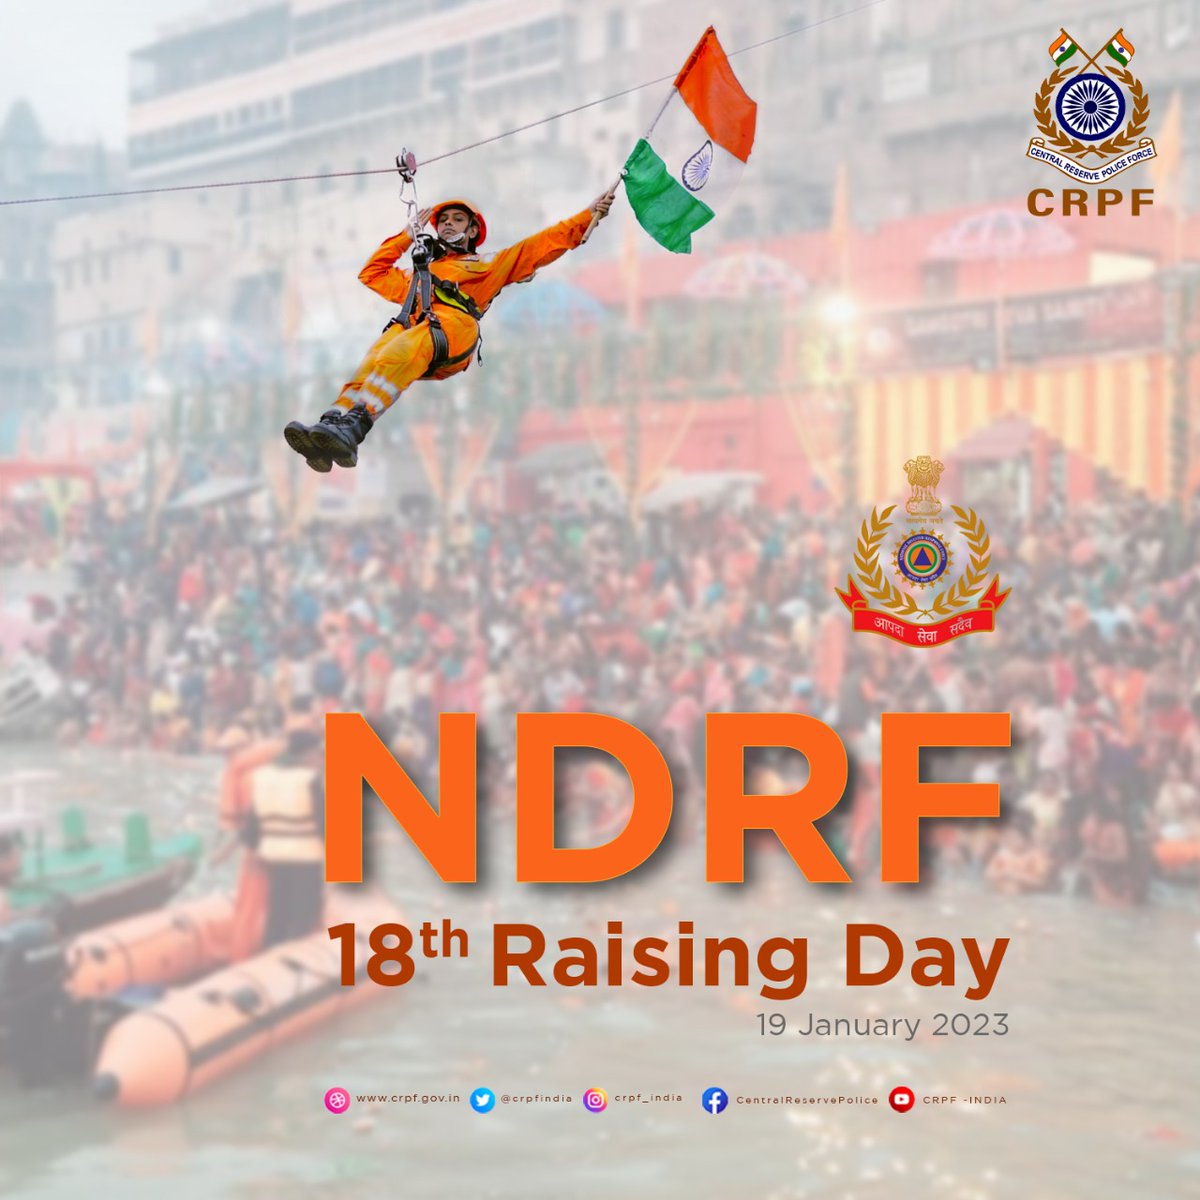 Sh. @sthaosen, DG and all ranks of #CRPF extend greetings to all the @NDRFHQ personnel and their families on the  NDRF Raising Day.

With the motto of 'आपदा सेवा सदैव सर्वत्र', NDRF has become synonymous with hope, for people affected by disasters.